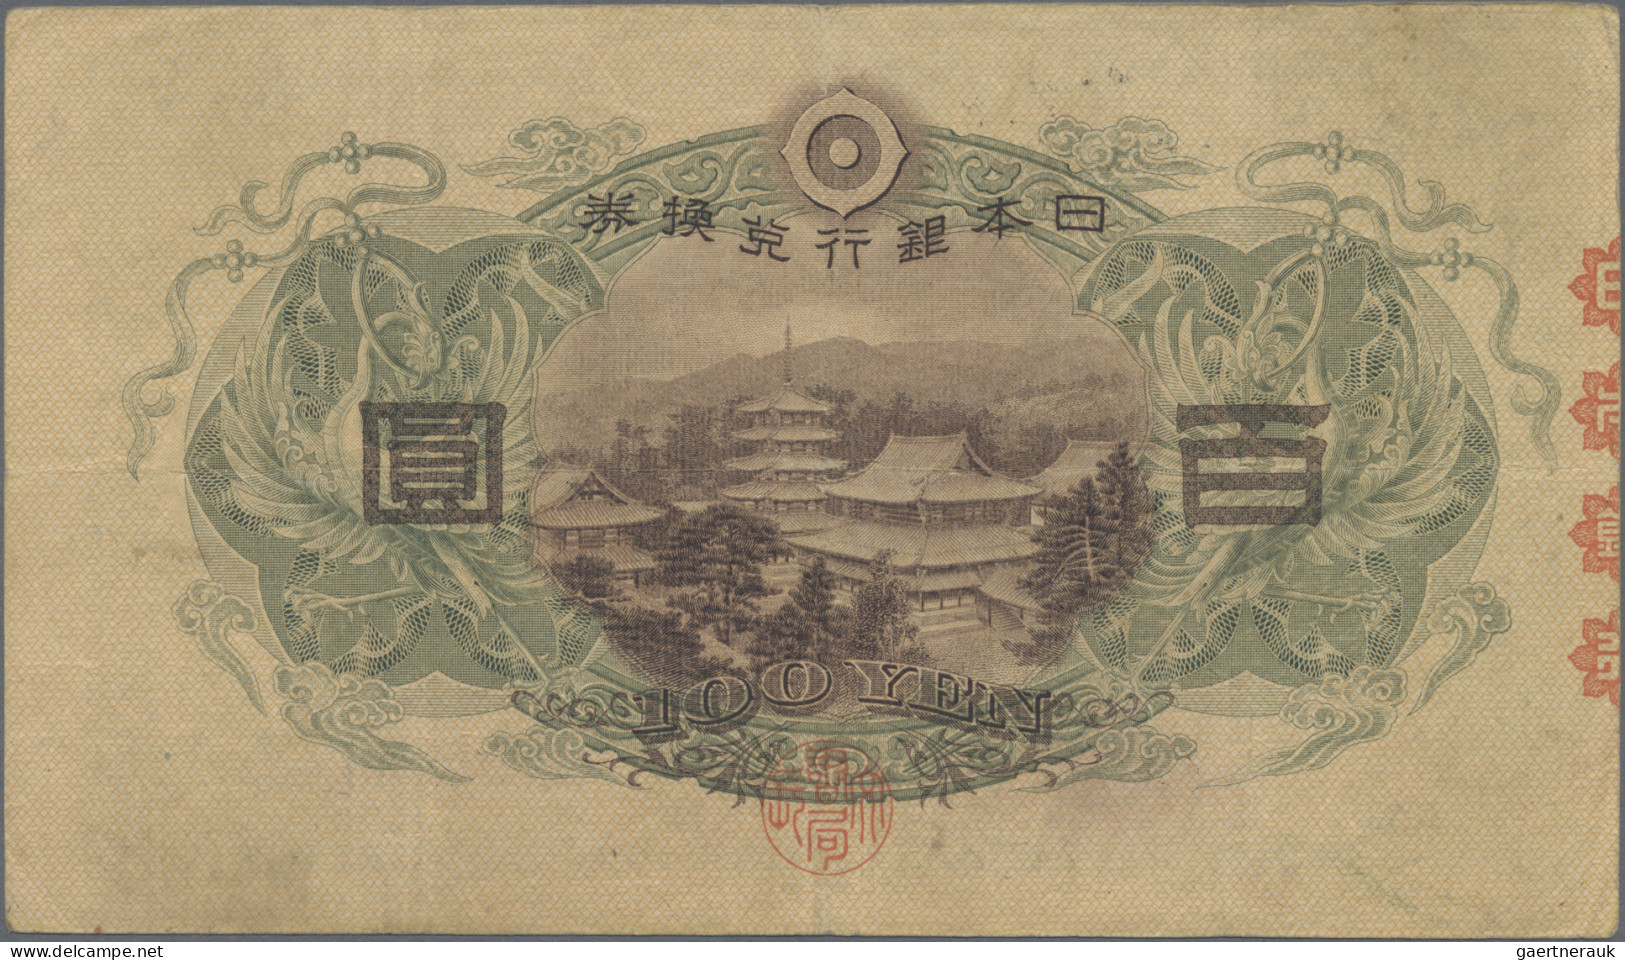 Japan: Bank of Japan, lot with 4 banknotes, series ND(1930-45), with 10 and 20 Y